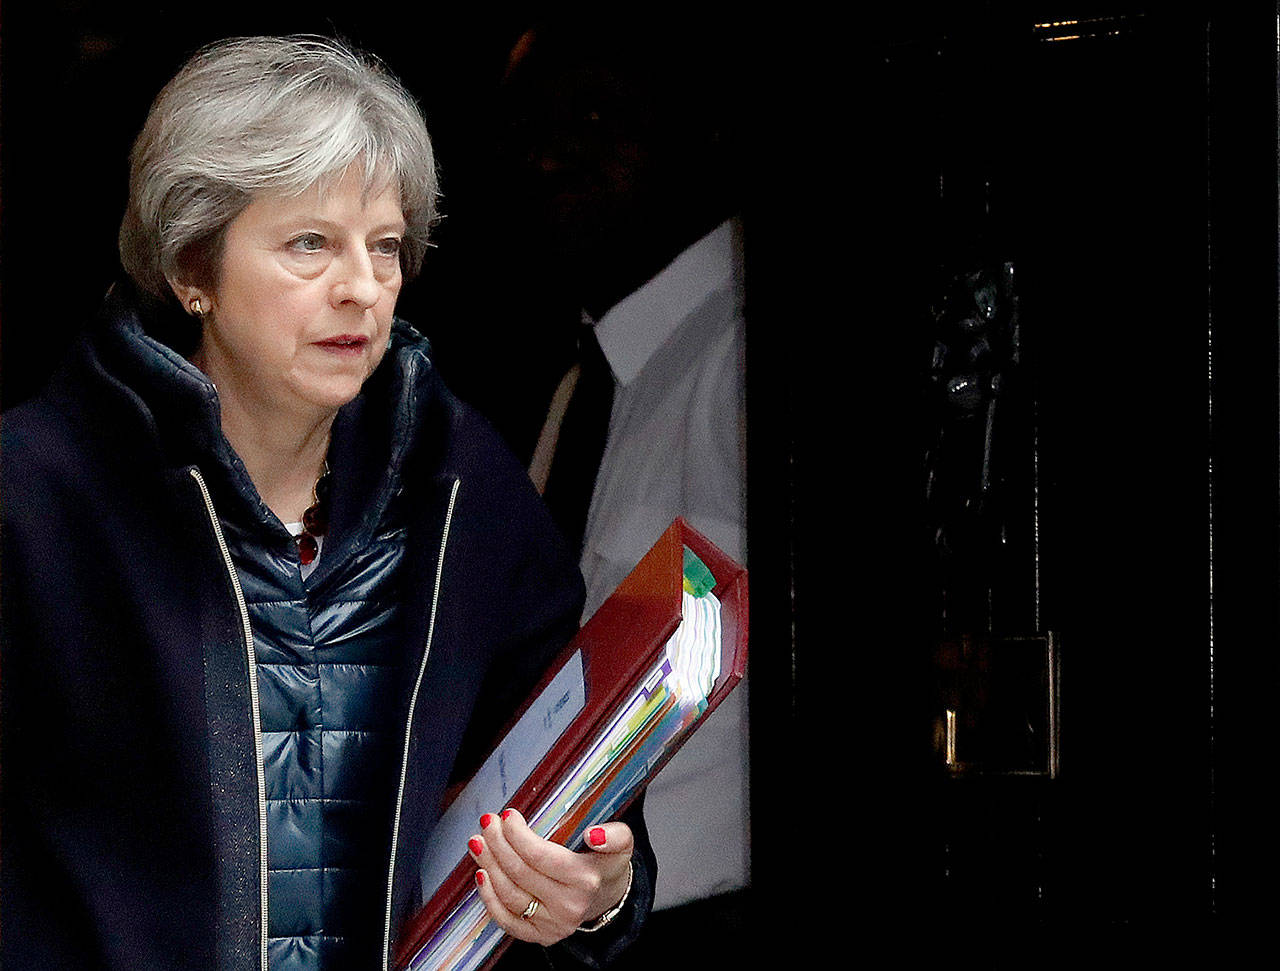 British Prime Minister Theresa May leaves 10 Downing Street to attend the weekly Prime Minister’s Questions session in parliament in London on Wednesday. (AP Photo/Frank Augstein)